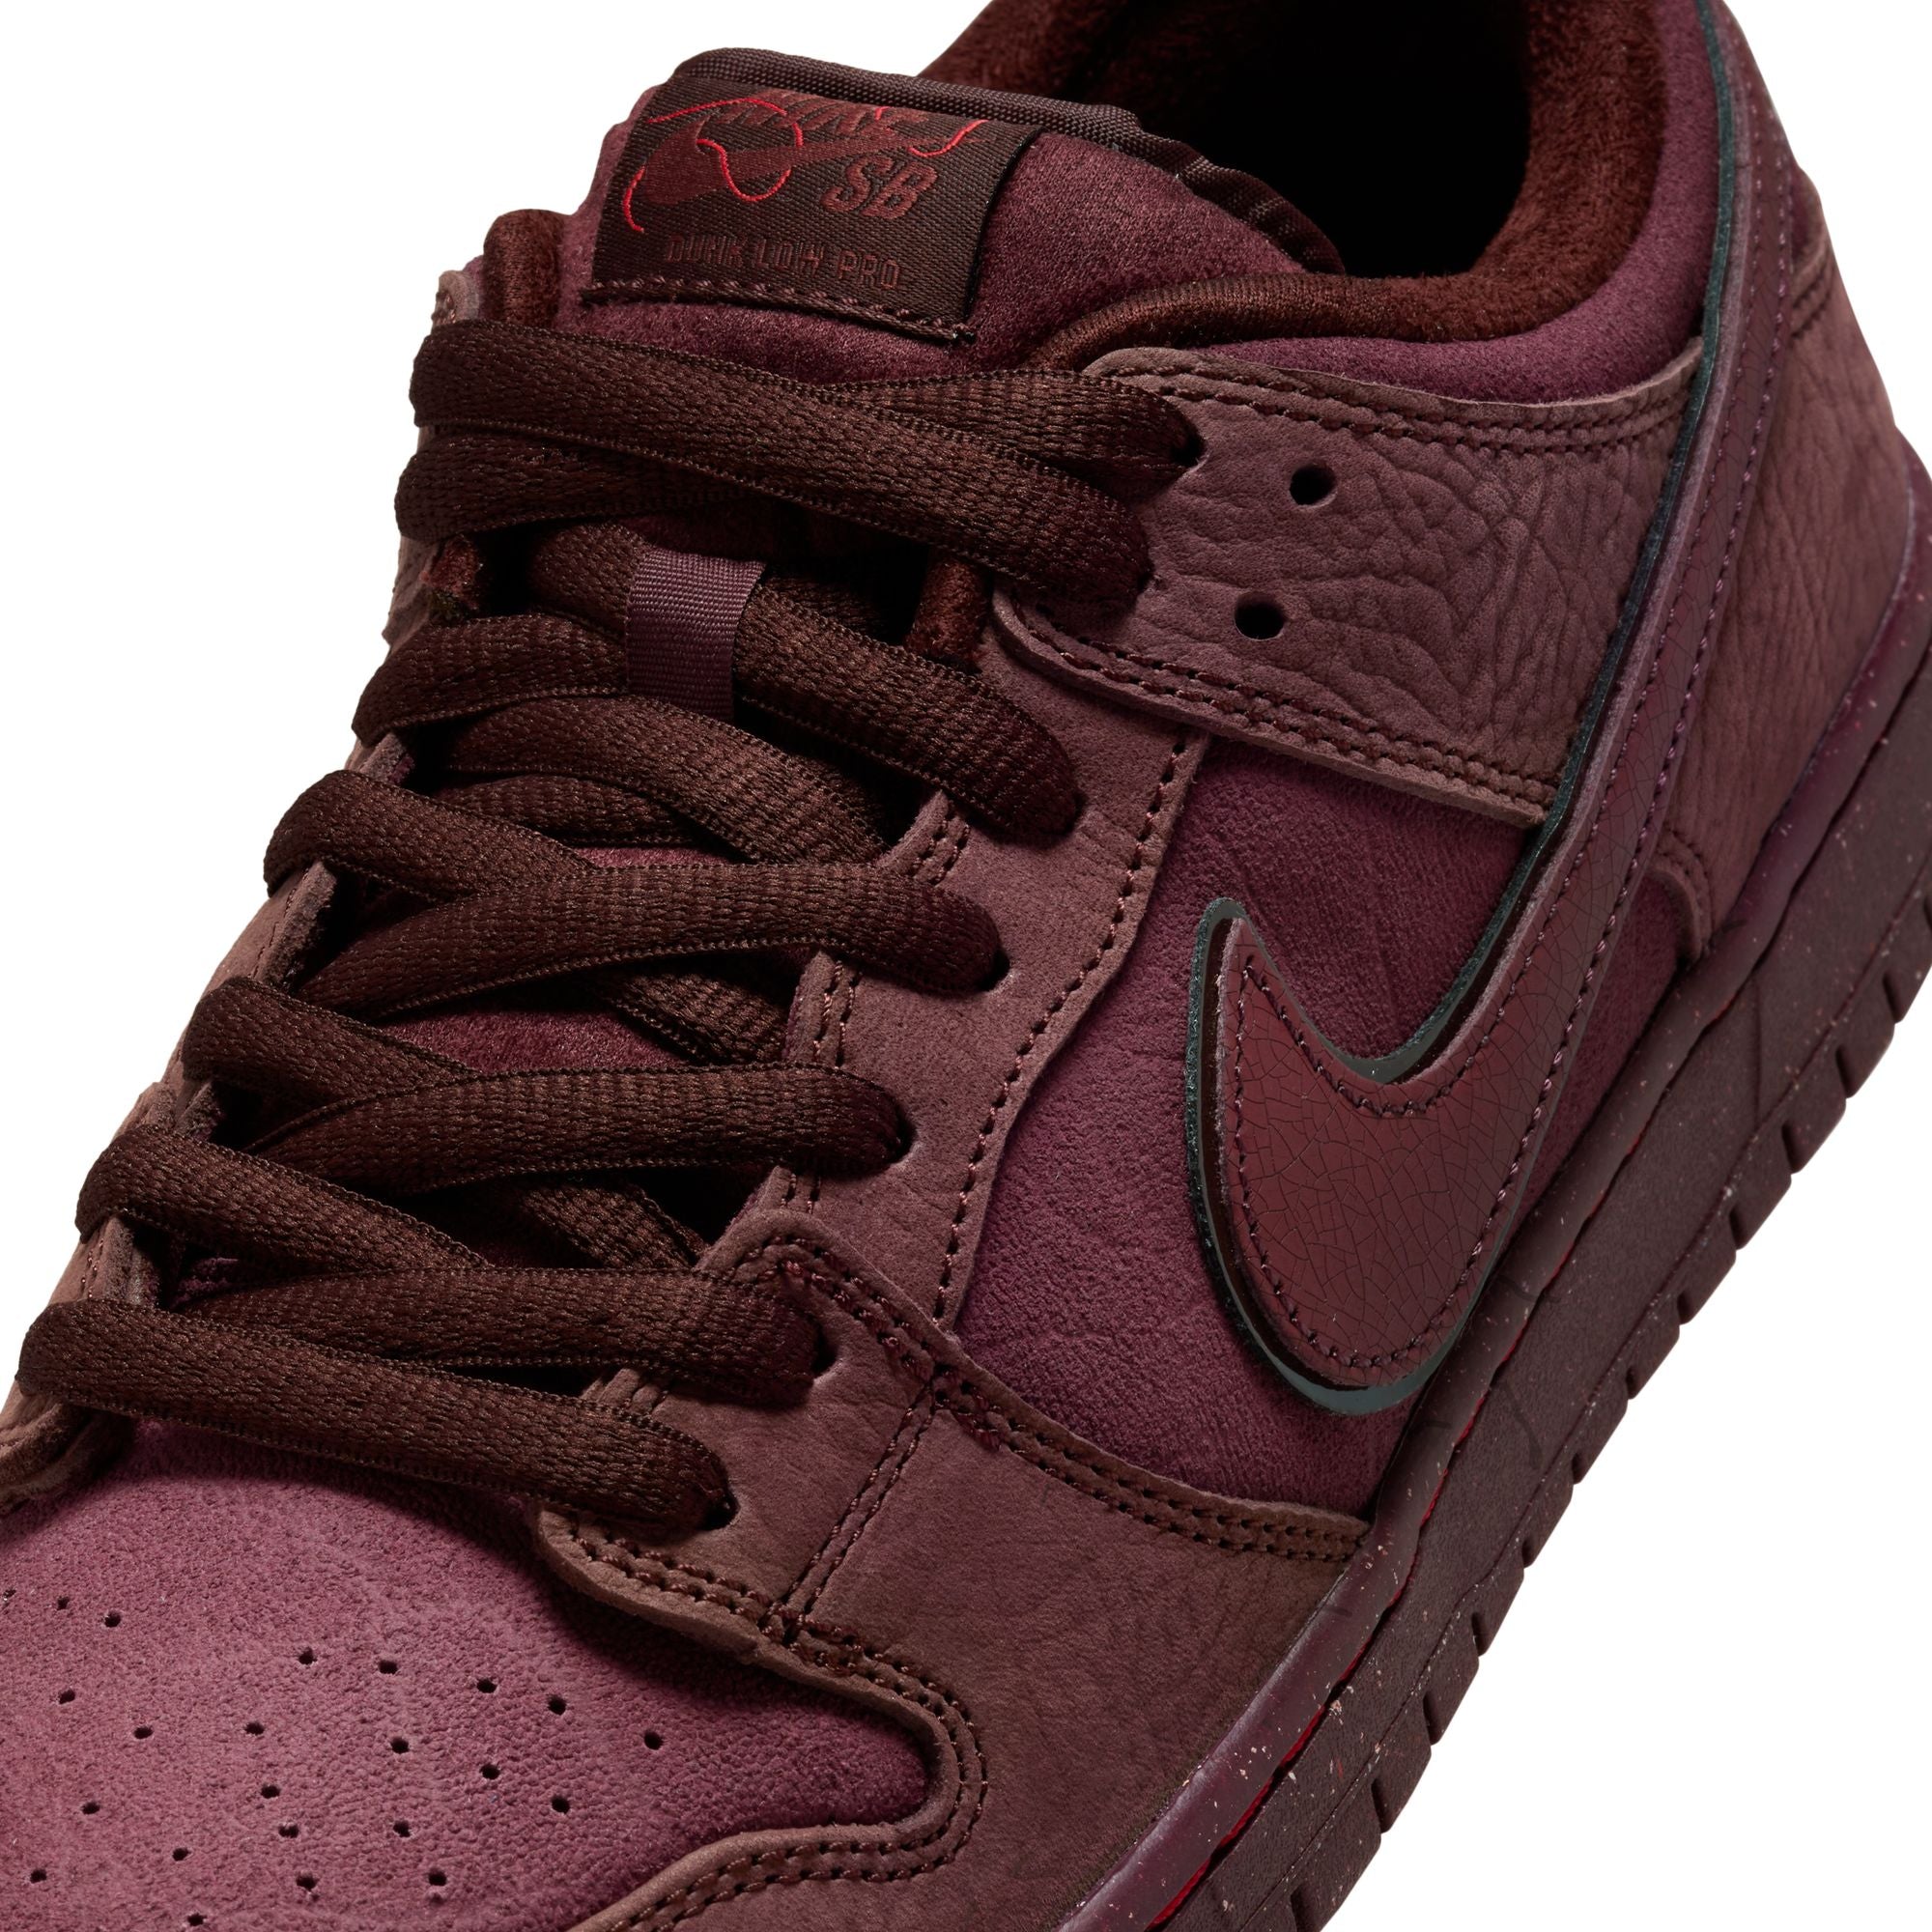 Burgundy nike sb dunk low top shoes with nike swoosh on sides. Free uk shipping over £50